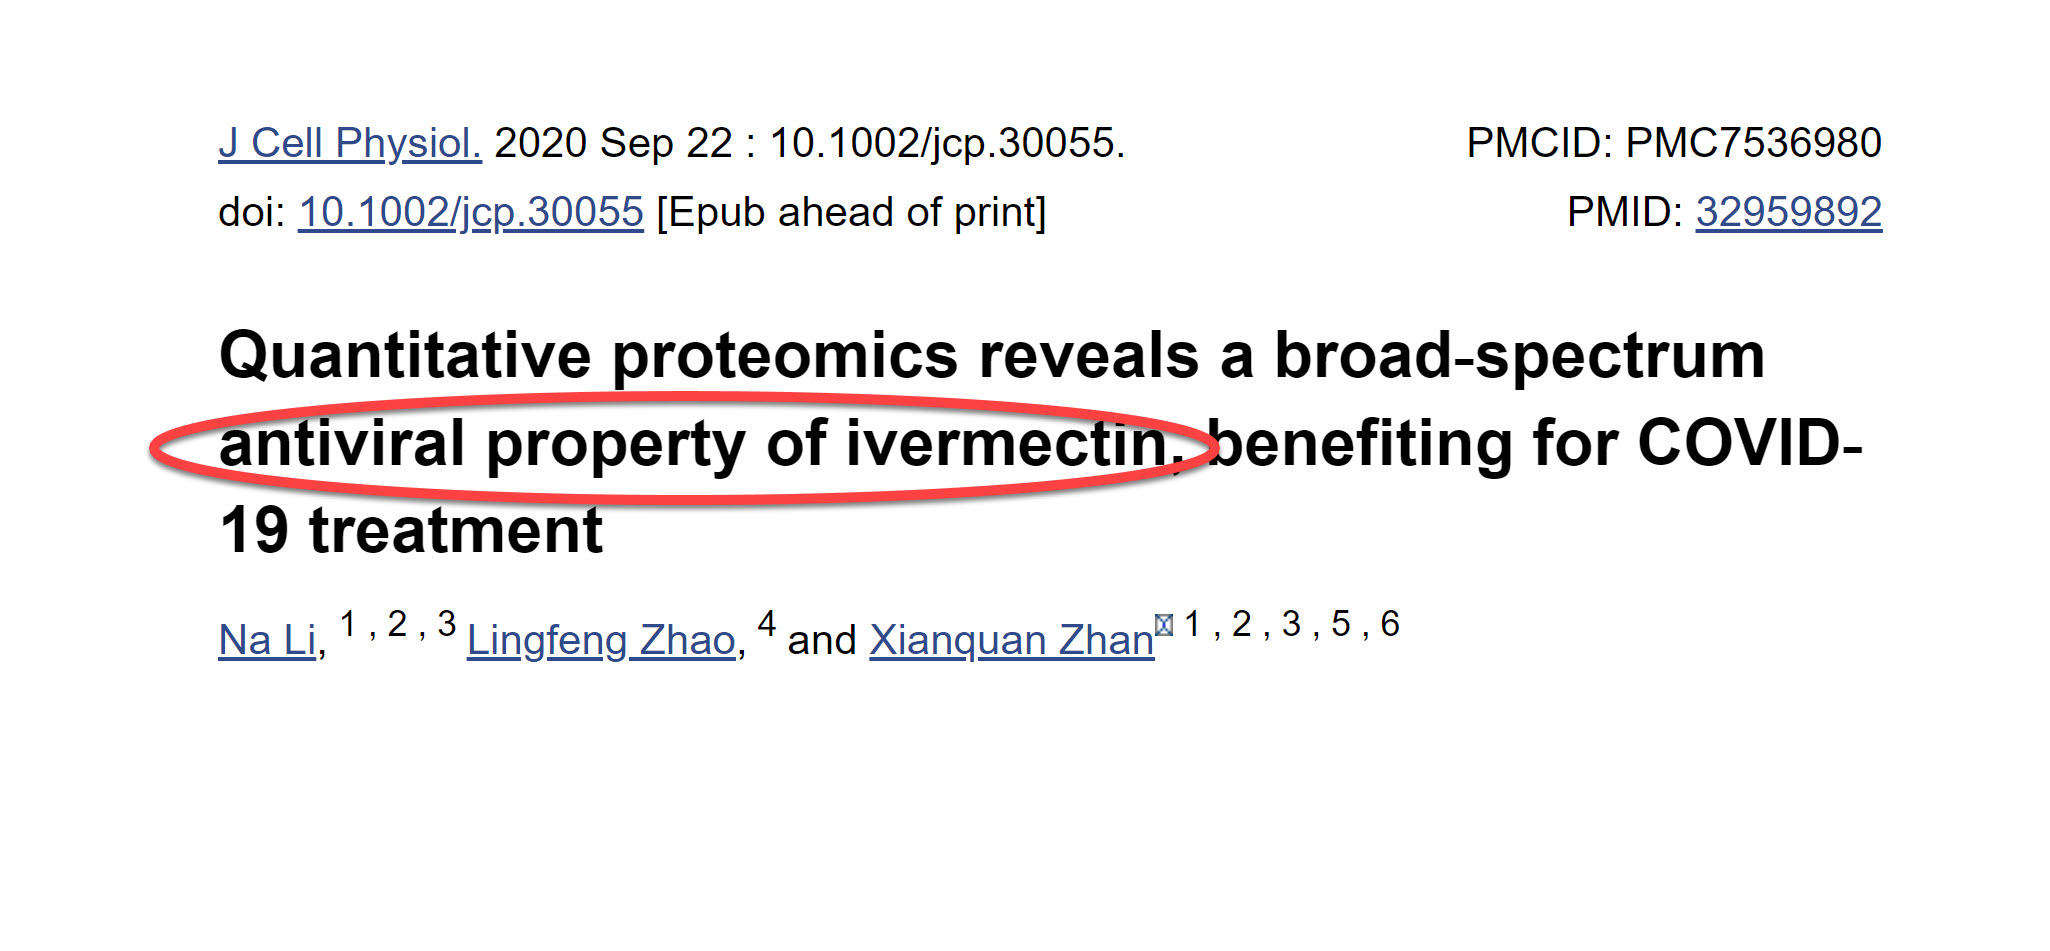 NIH Paper: Ivermectin Has Broad Antiviral Properties; Benefits for COVID-19